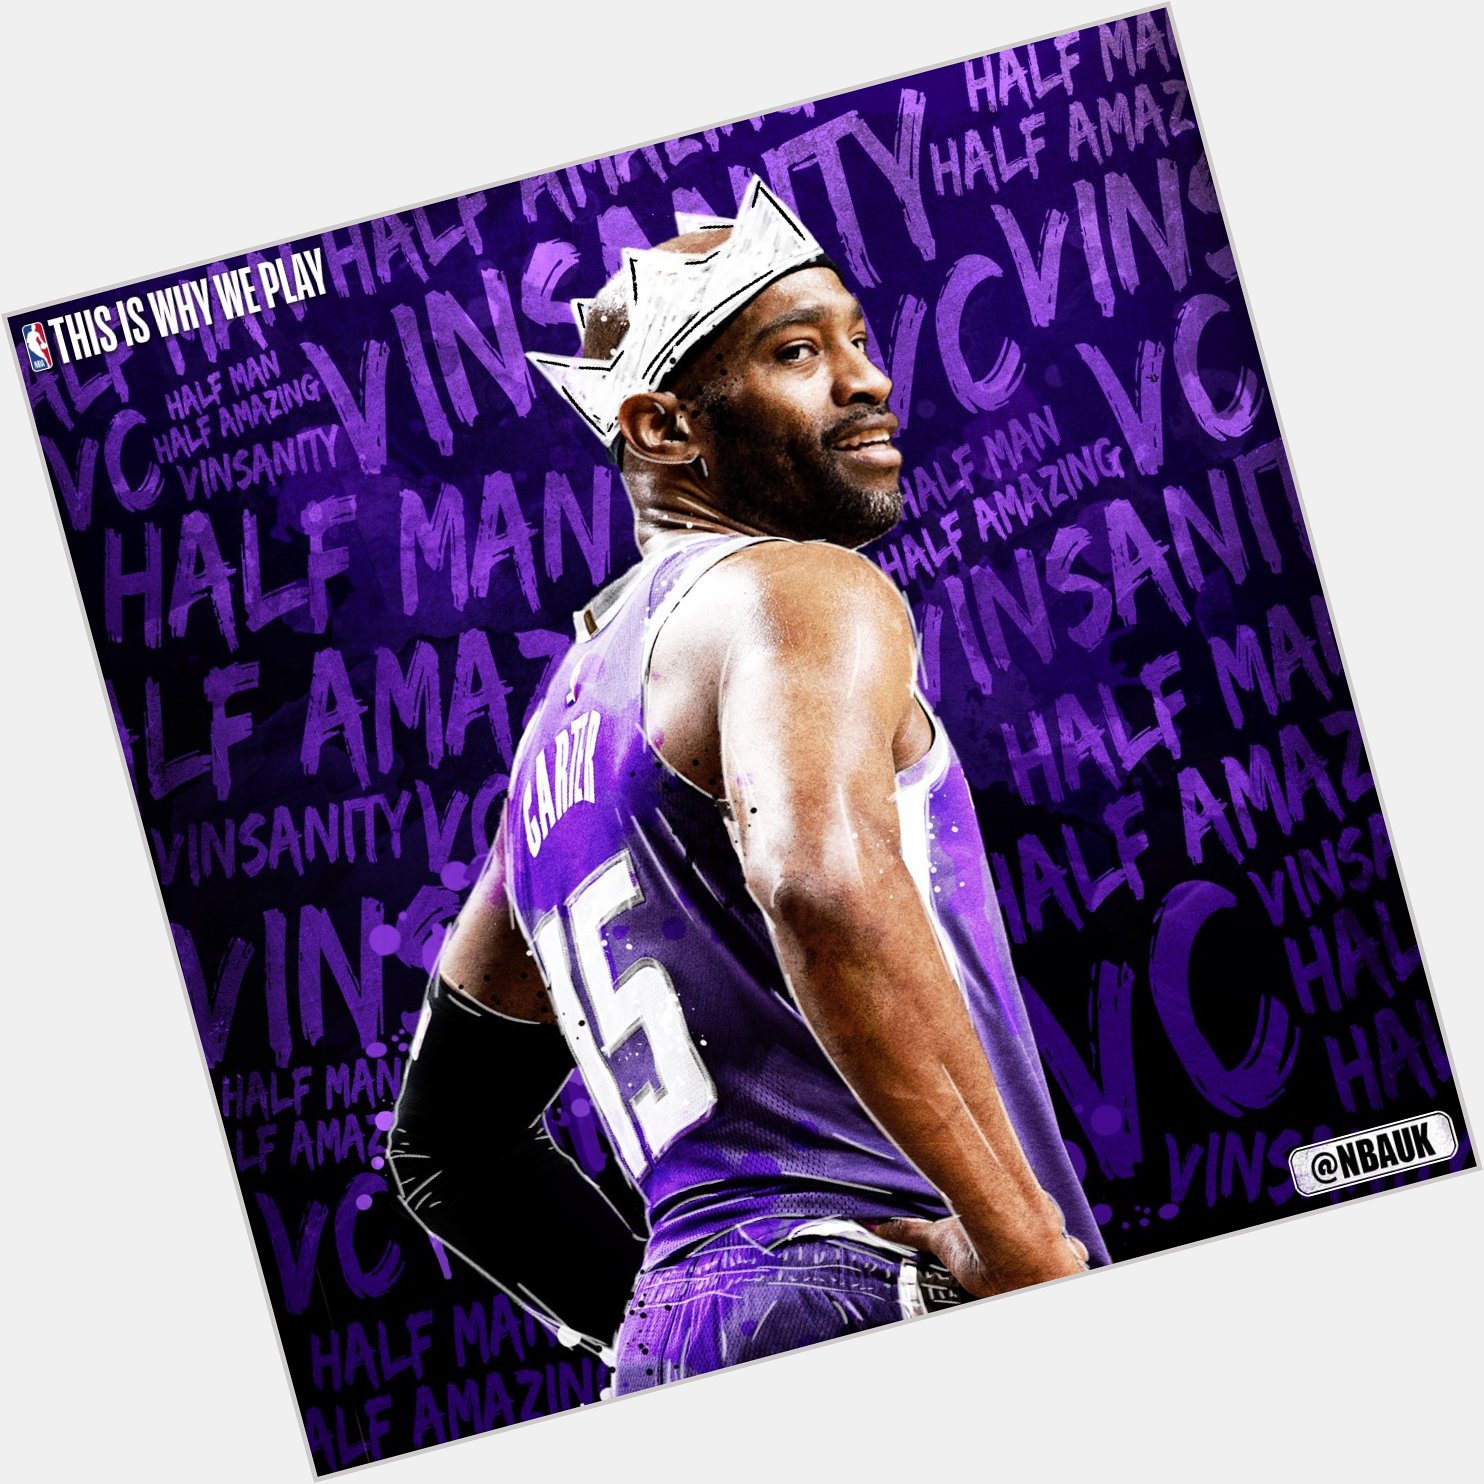   Join us as we wish the incredible Vince Carter a very happy 41st birthday! 